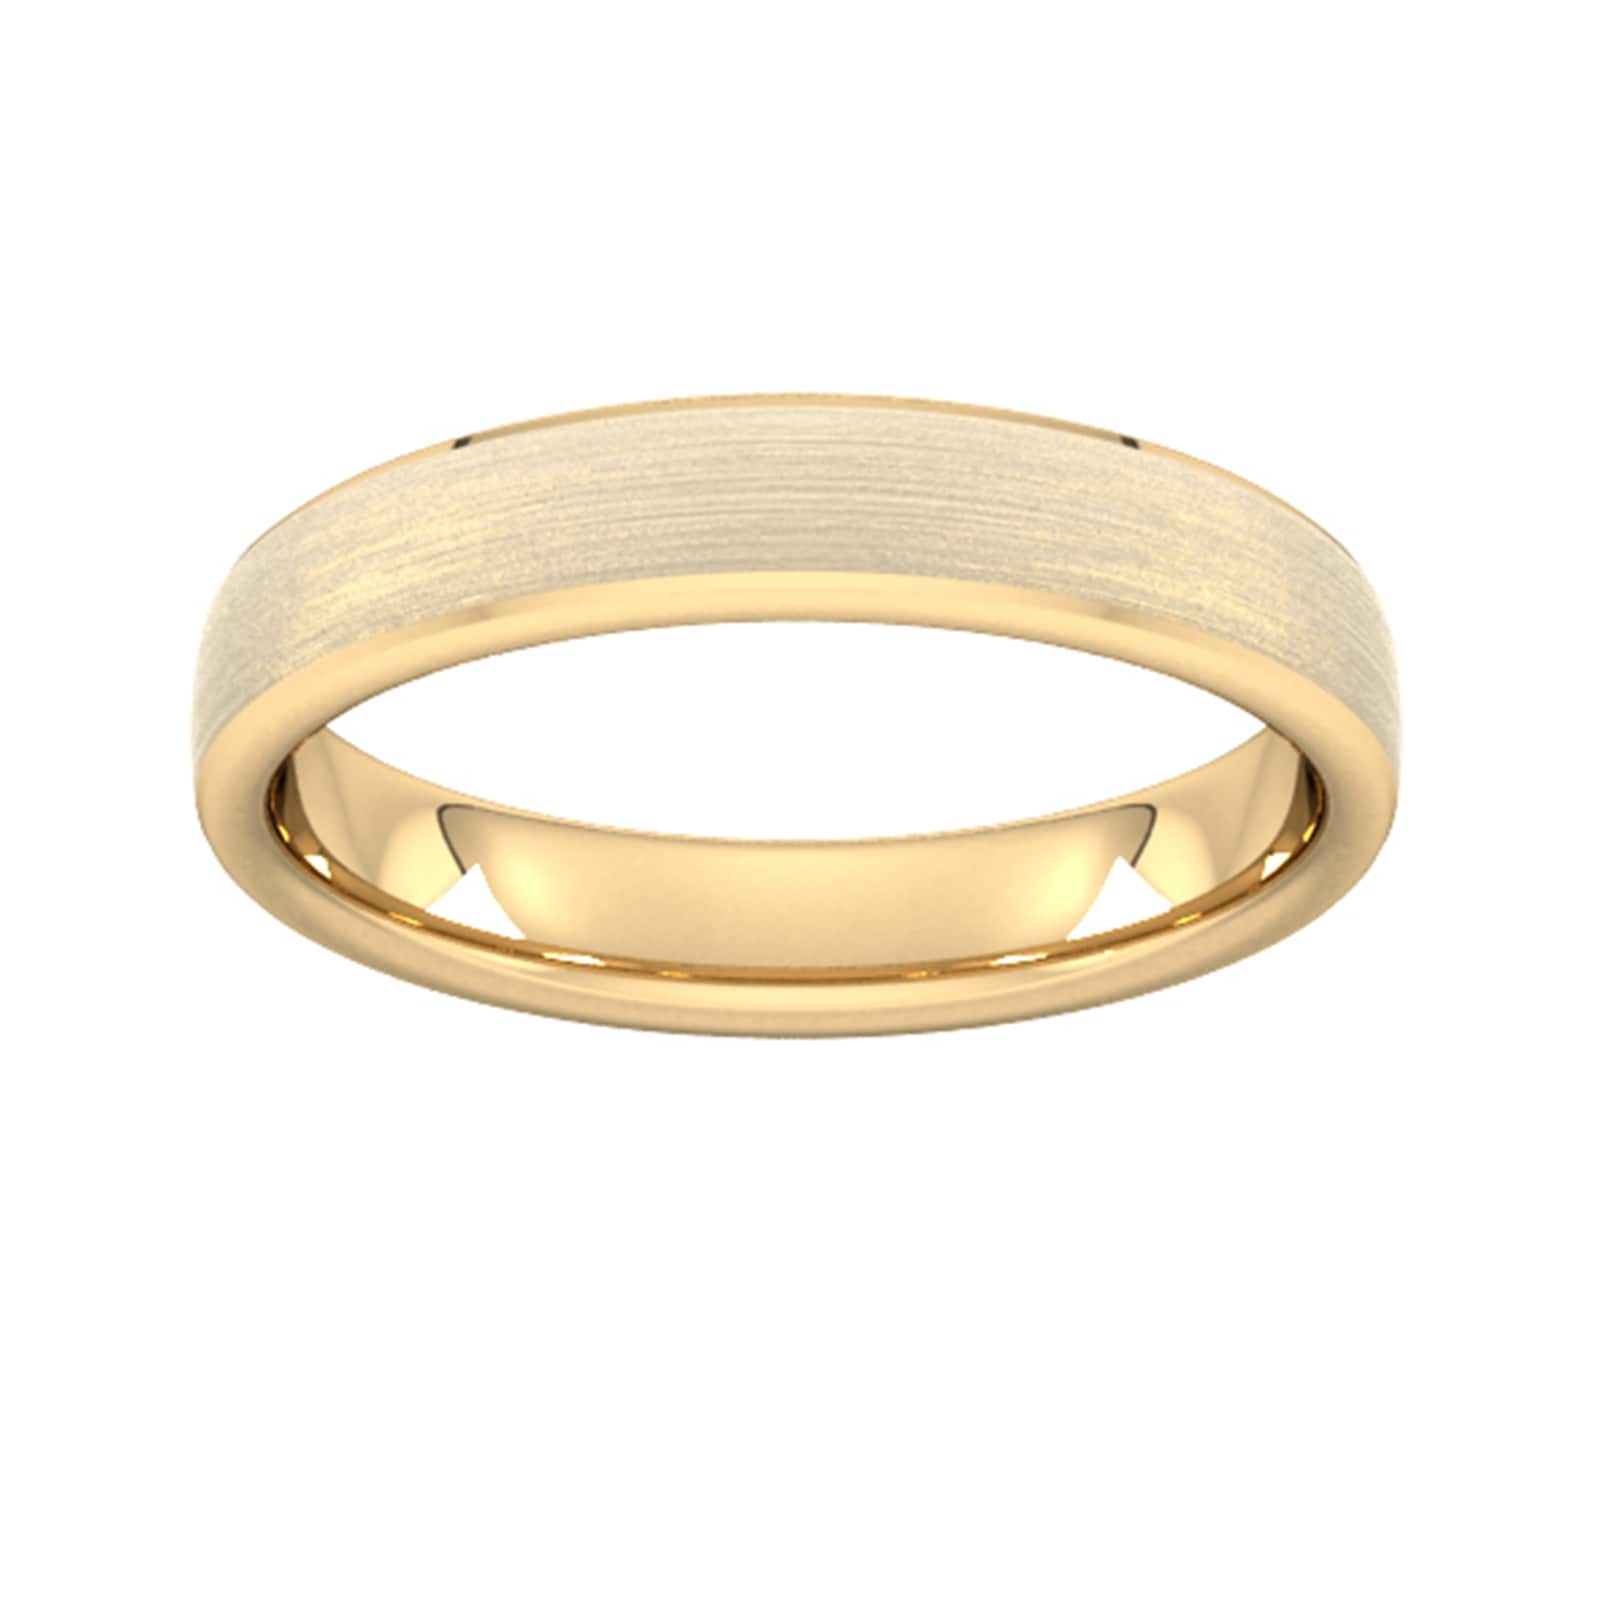 4mm Traditional Court Standard Polished Chamfered Edges With Matt Centre Wedding Ring In 18 Carat Yellow Gold - Ring Size Q